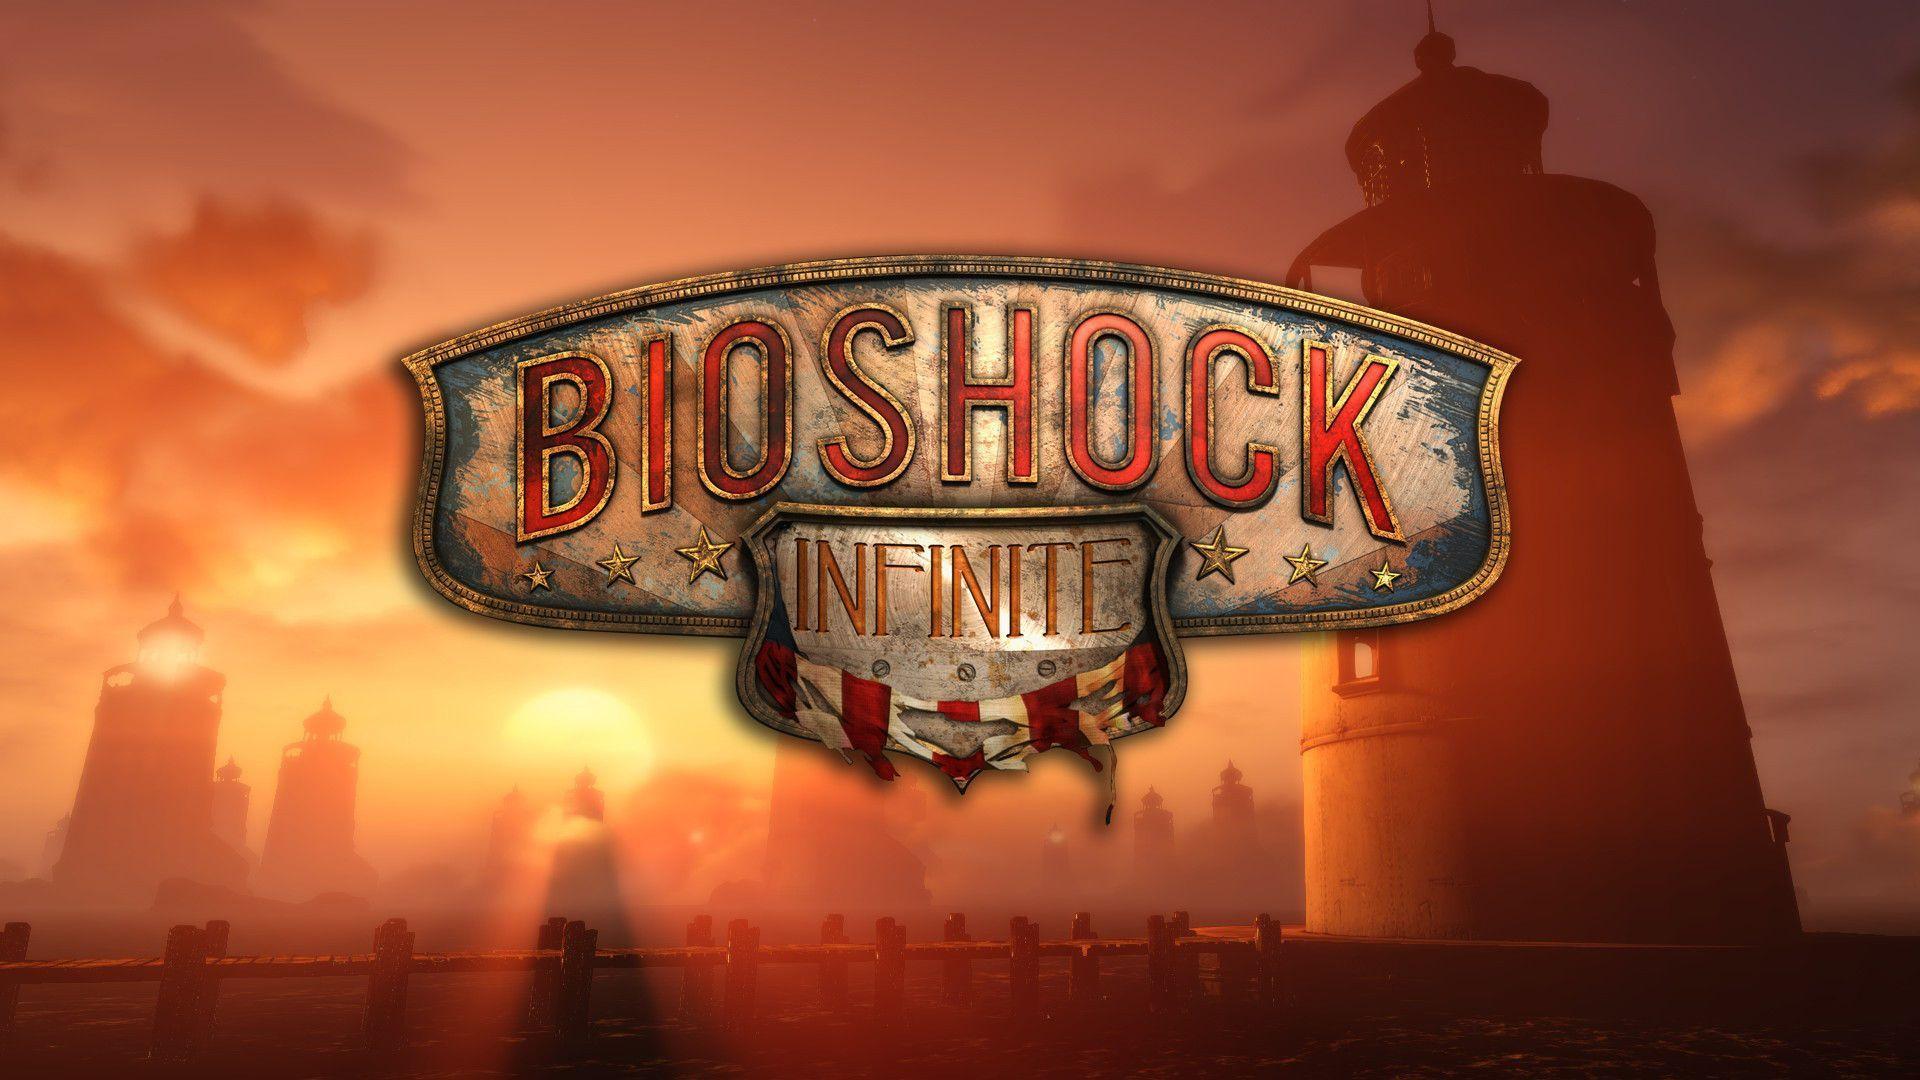 could someone make a Bioshock Infinite wallpaper with infinite